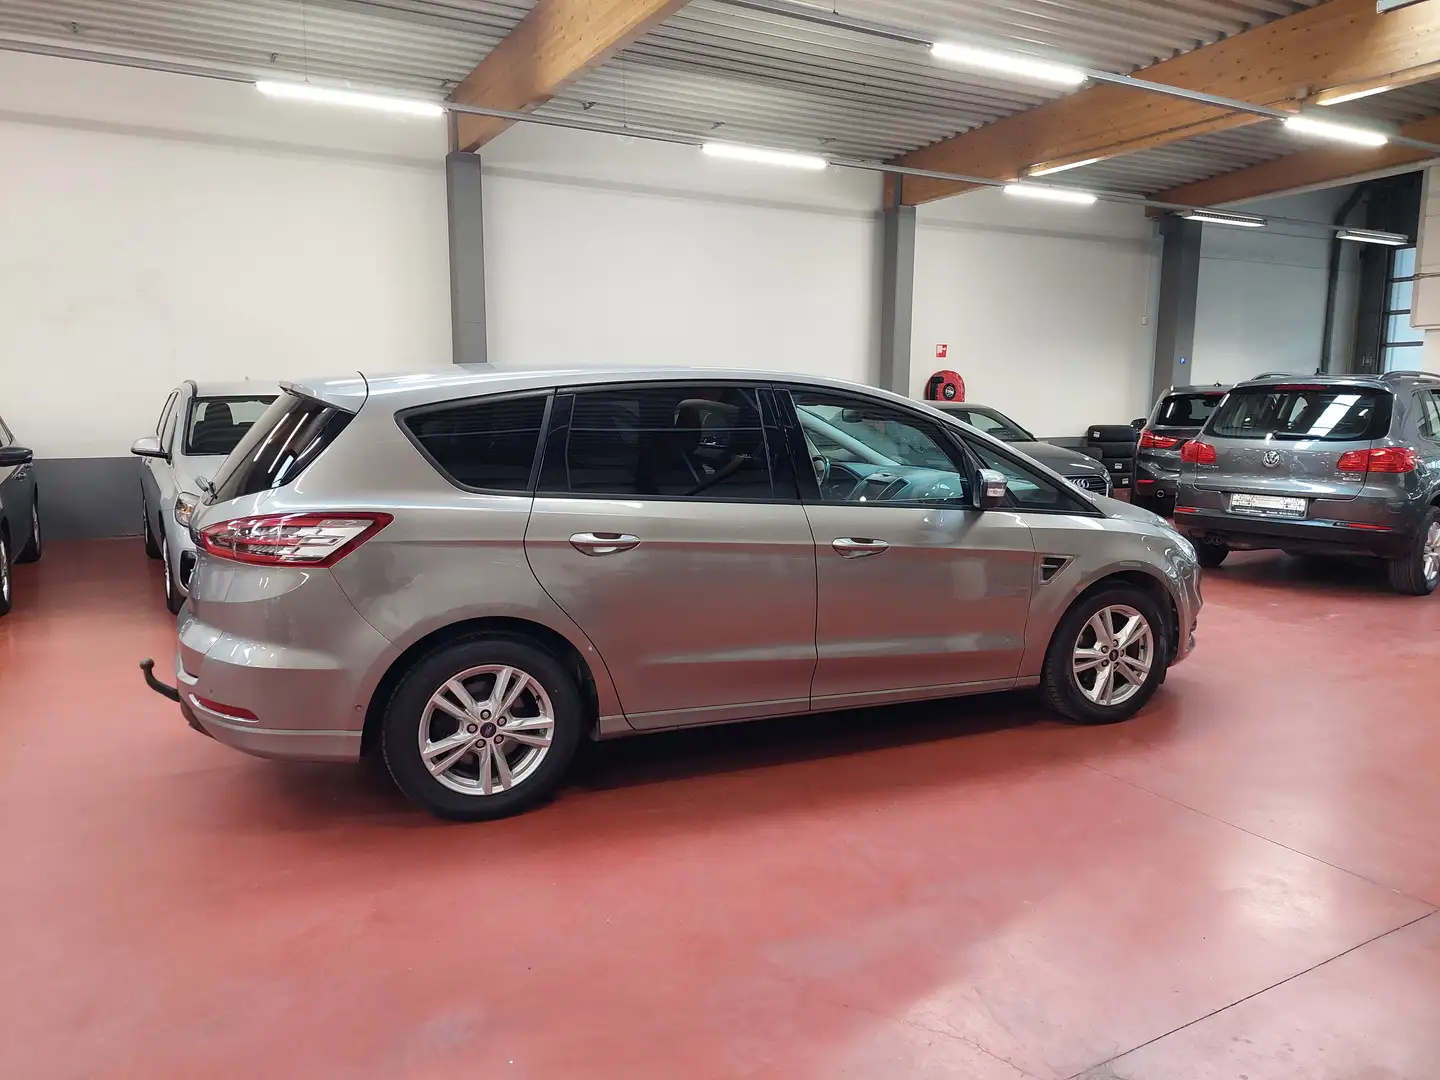 Ford S-Max 2.0 TDCi - 7 PLACES - NAVI - Safety Pack - Garanti Gris - 2